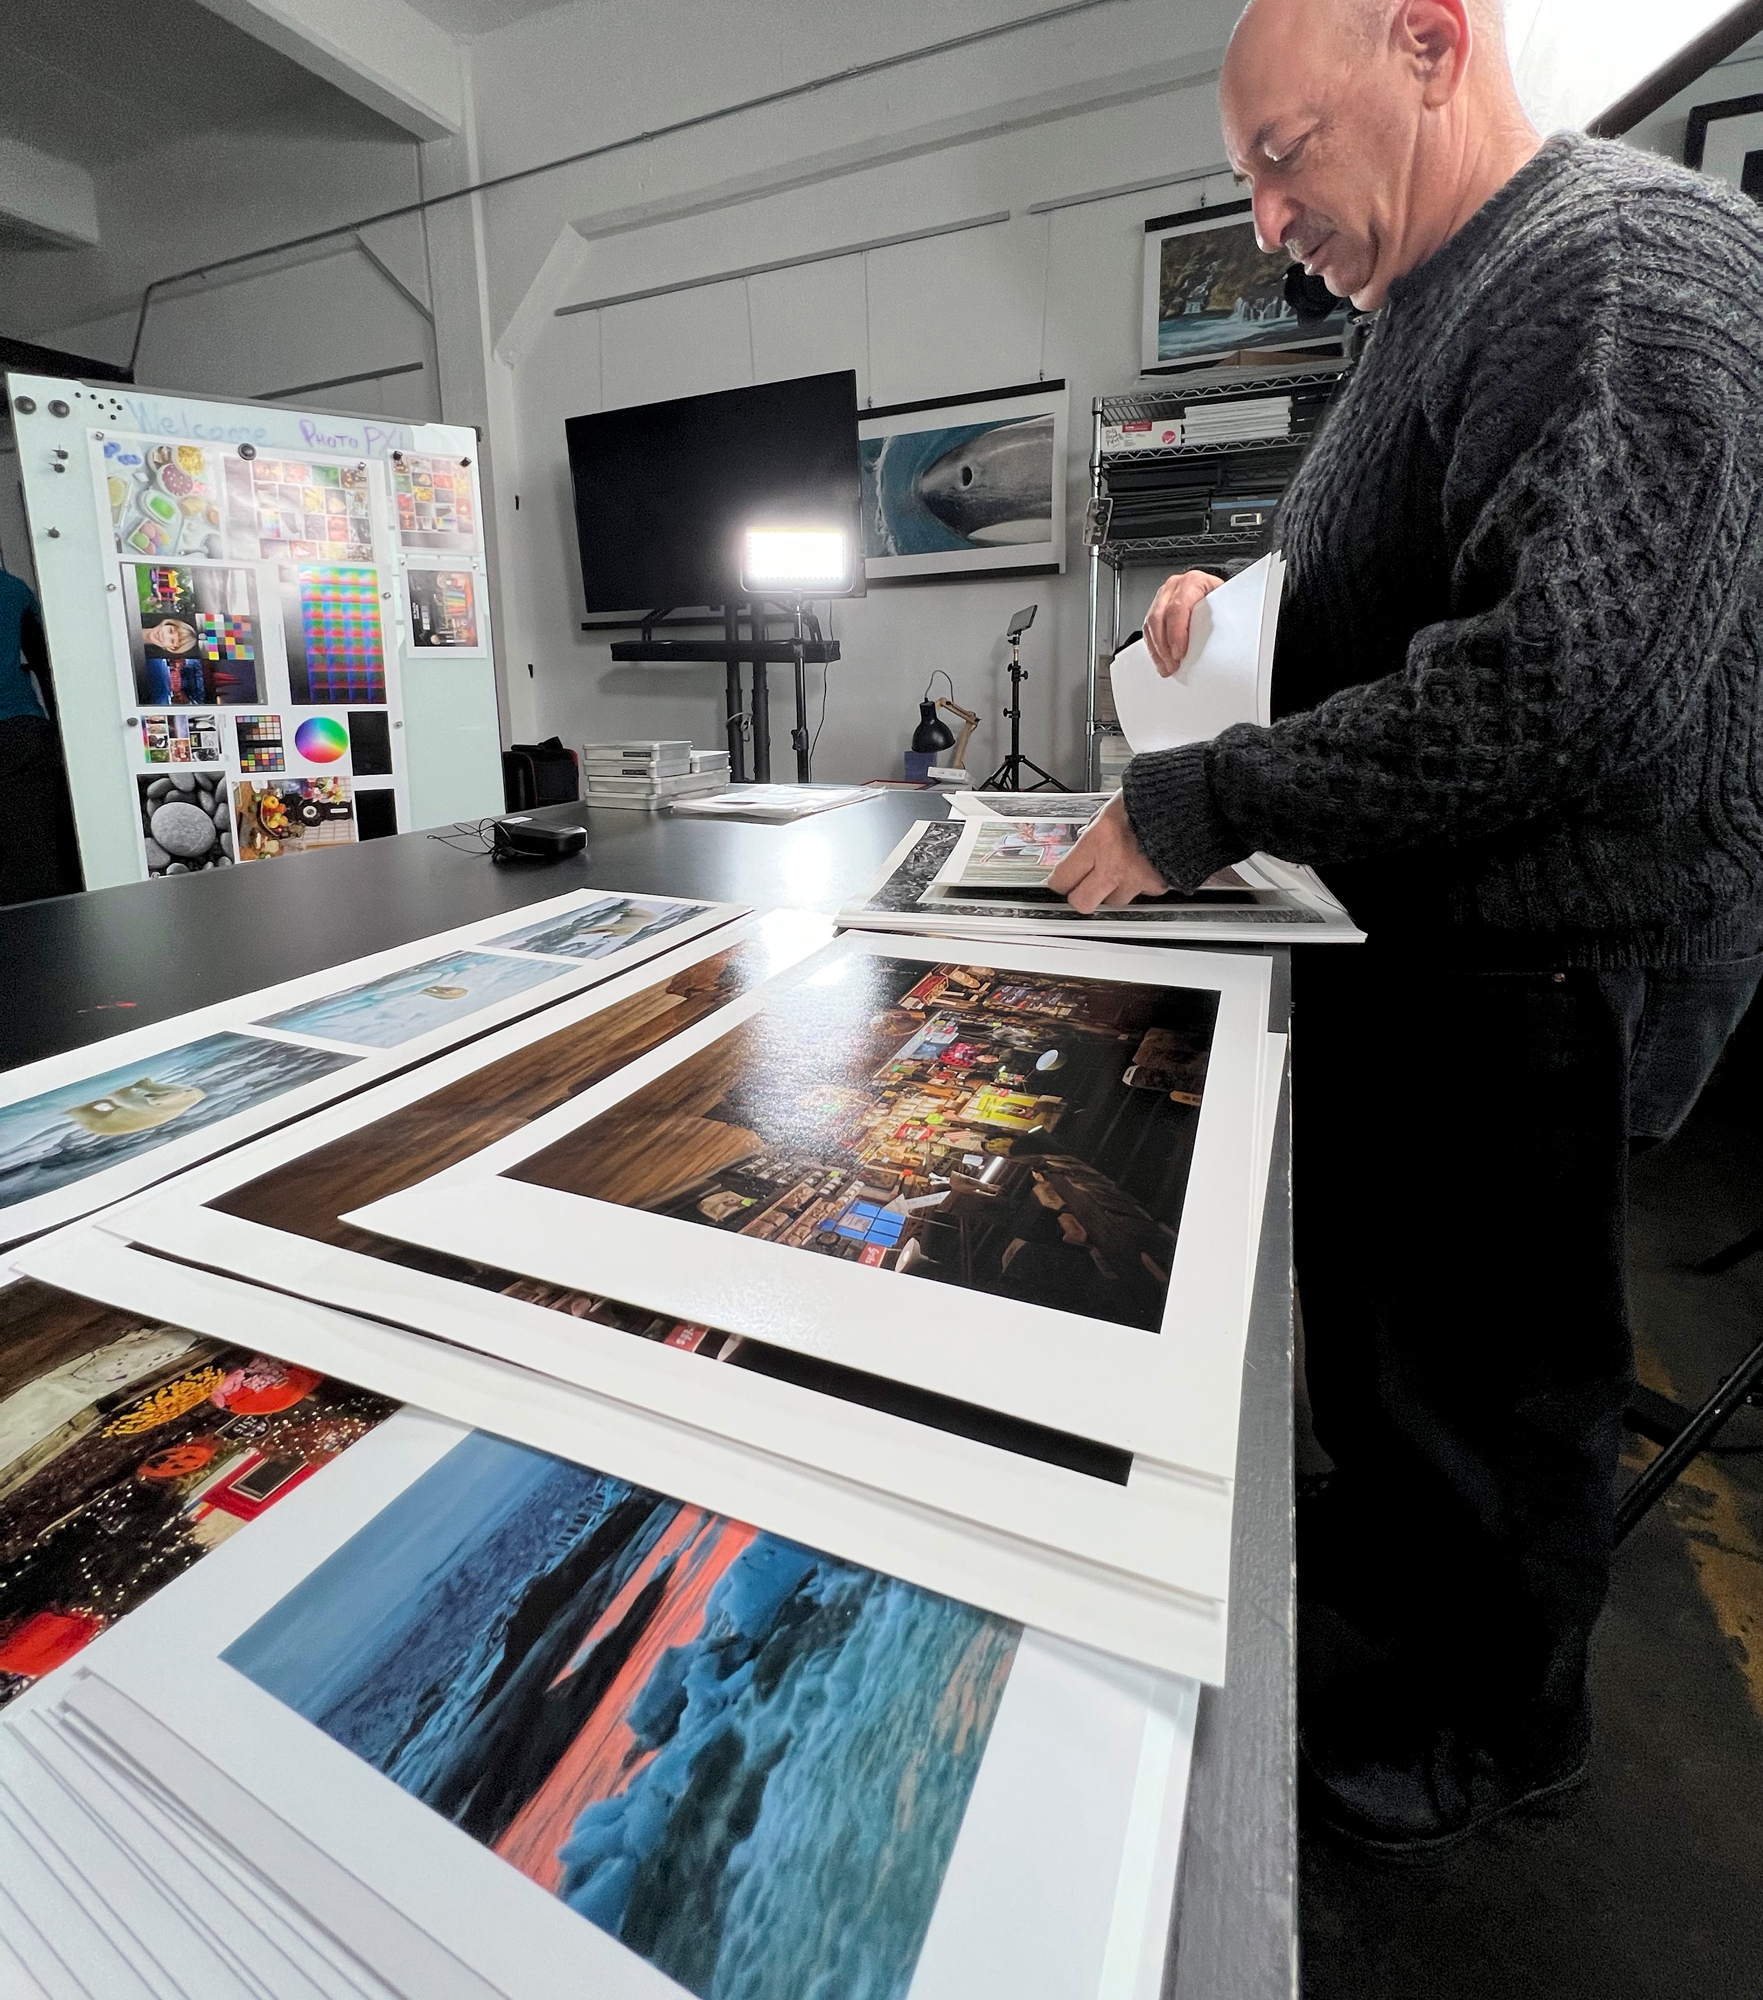 Dano sorting through some of the prints he brought